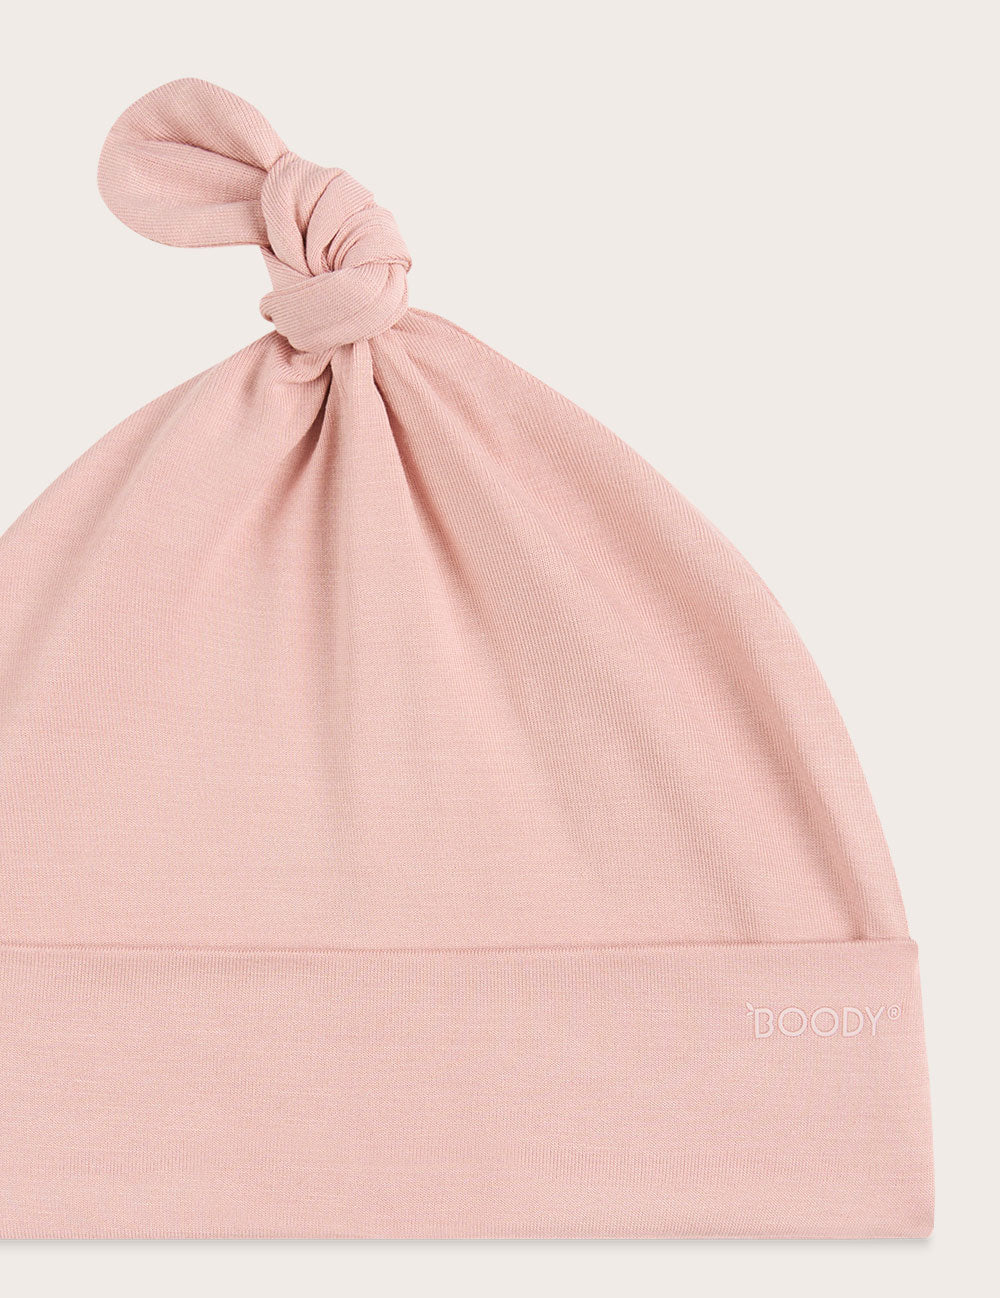 BB1007_DUSTY PINK_Baby Knotted Beanie_4.jpg